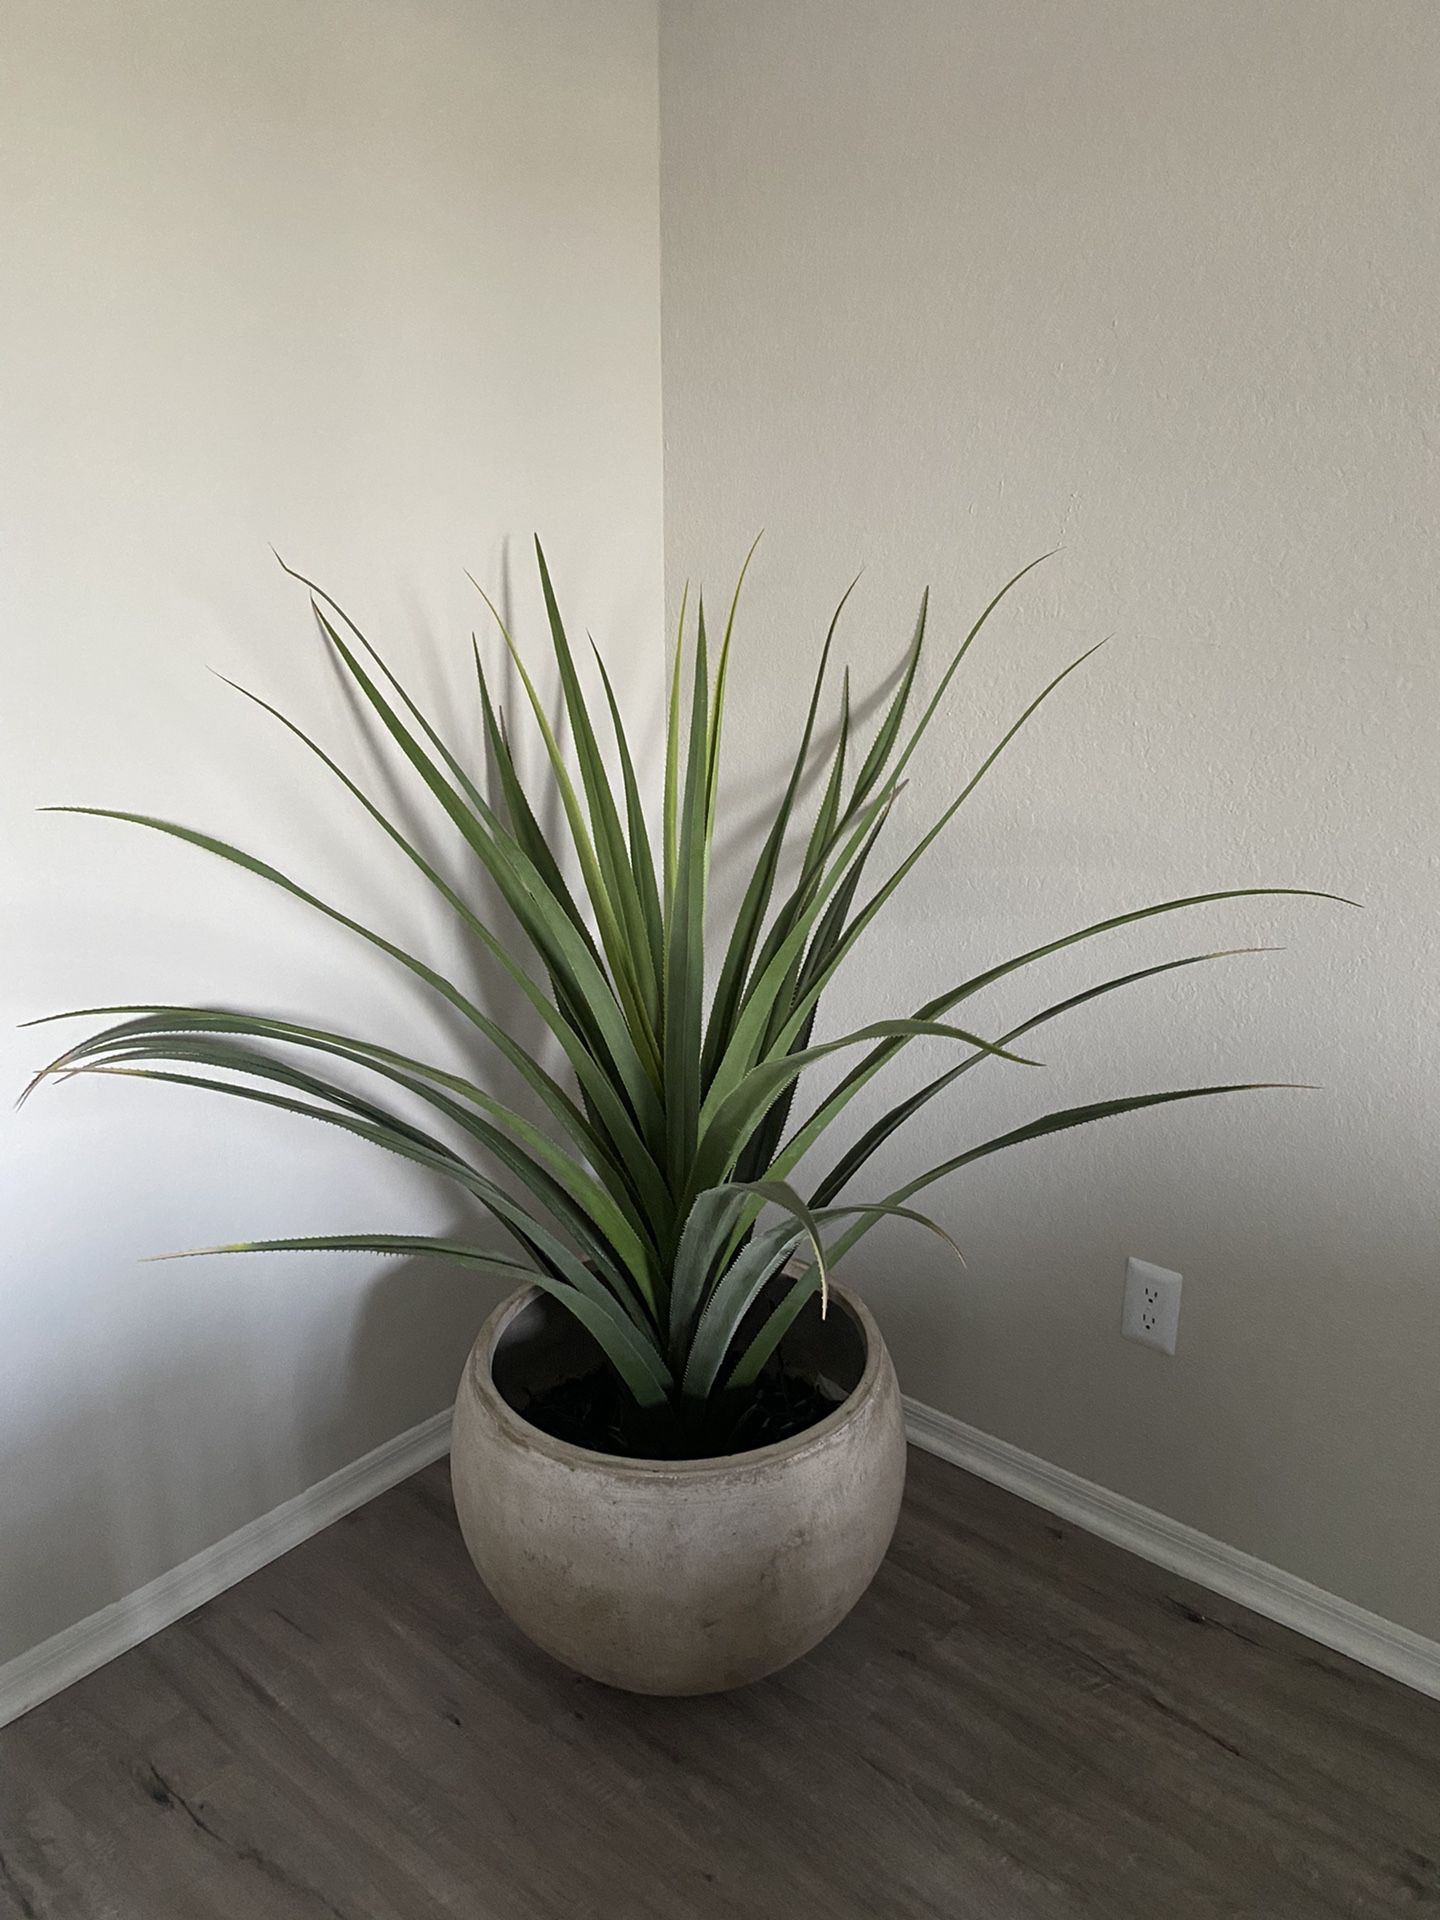 NEW Agave Plant with Pot (artificial but realistic looking)